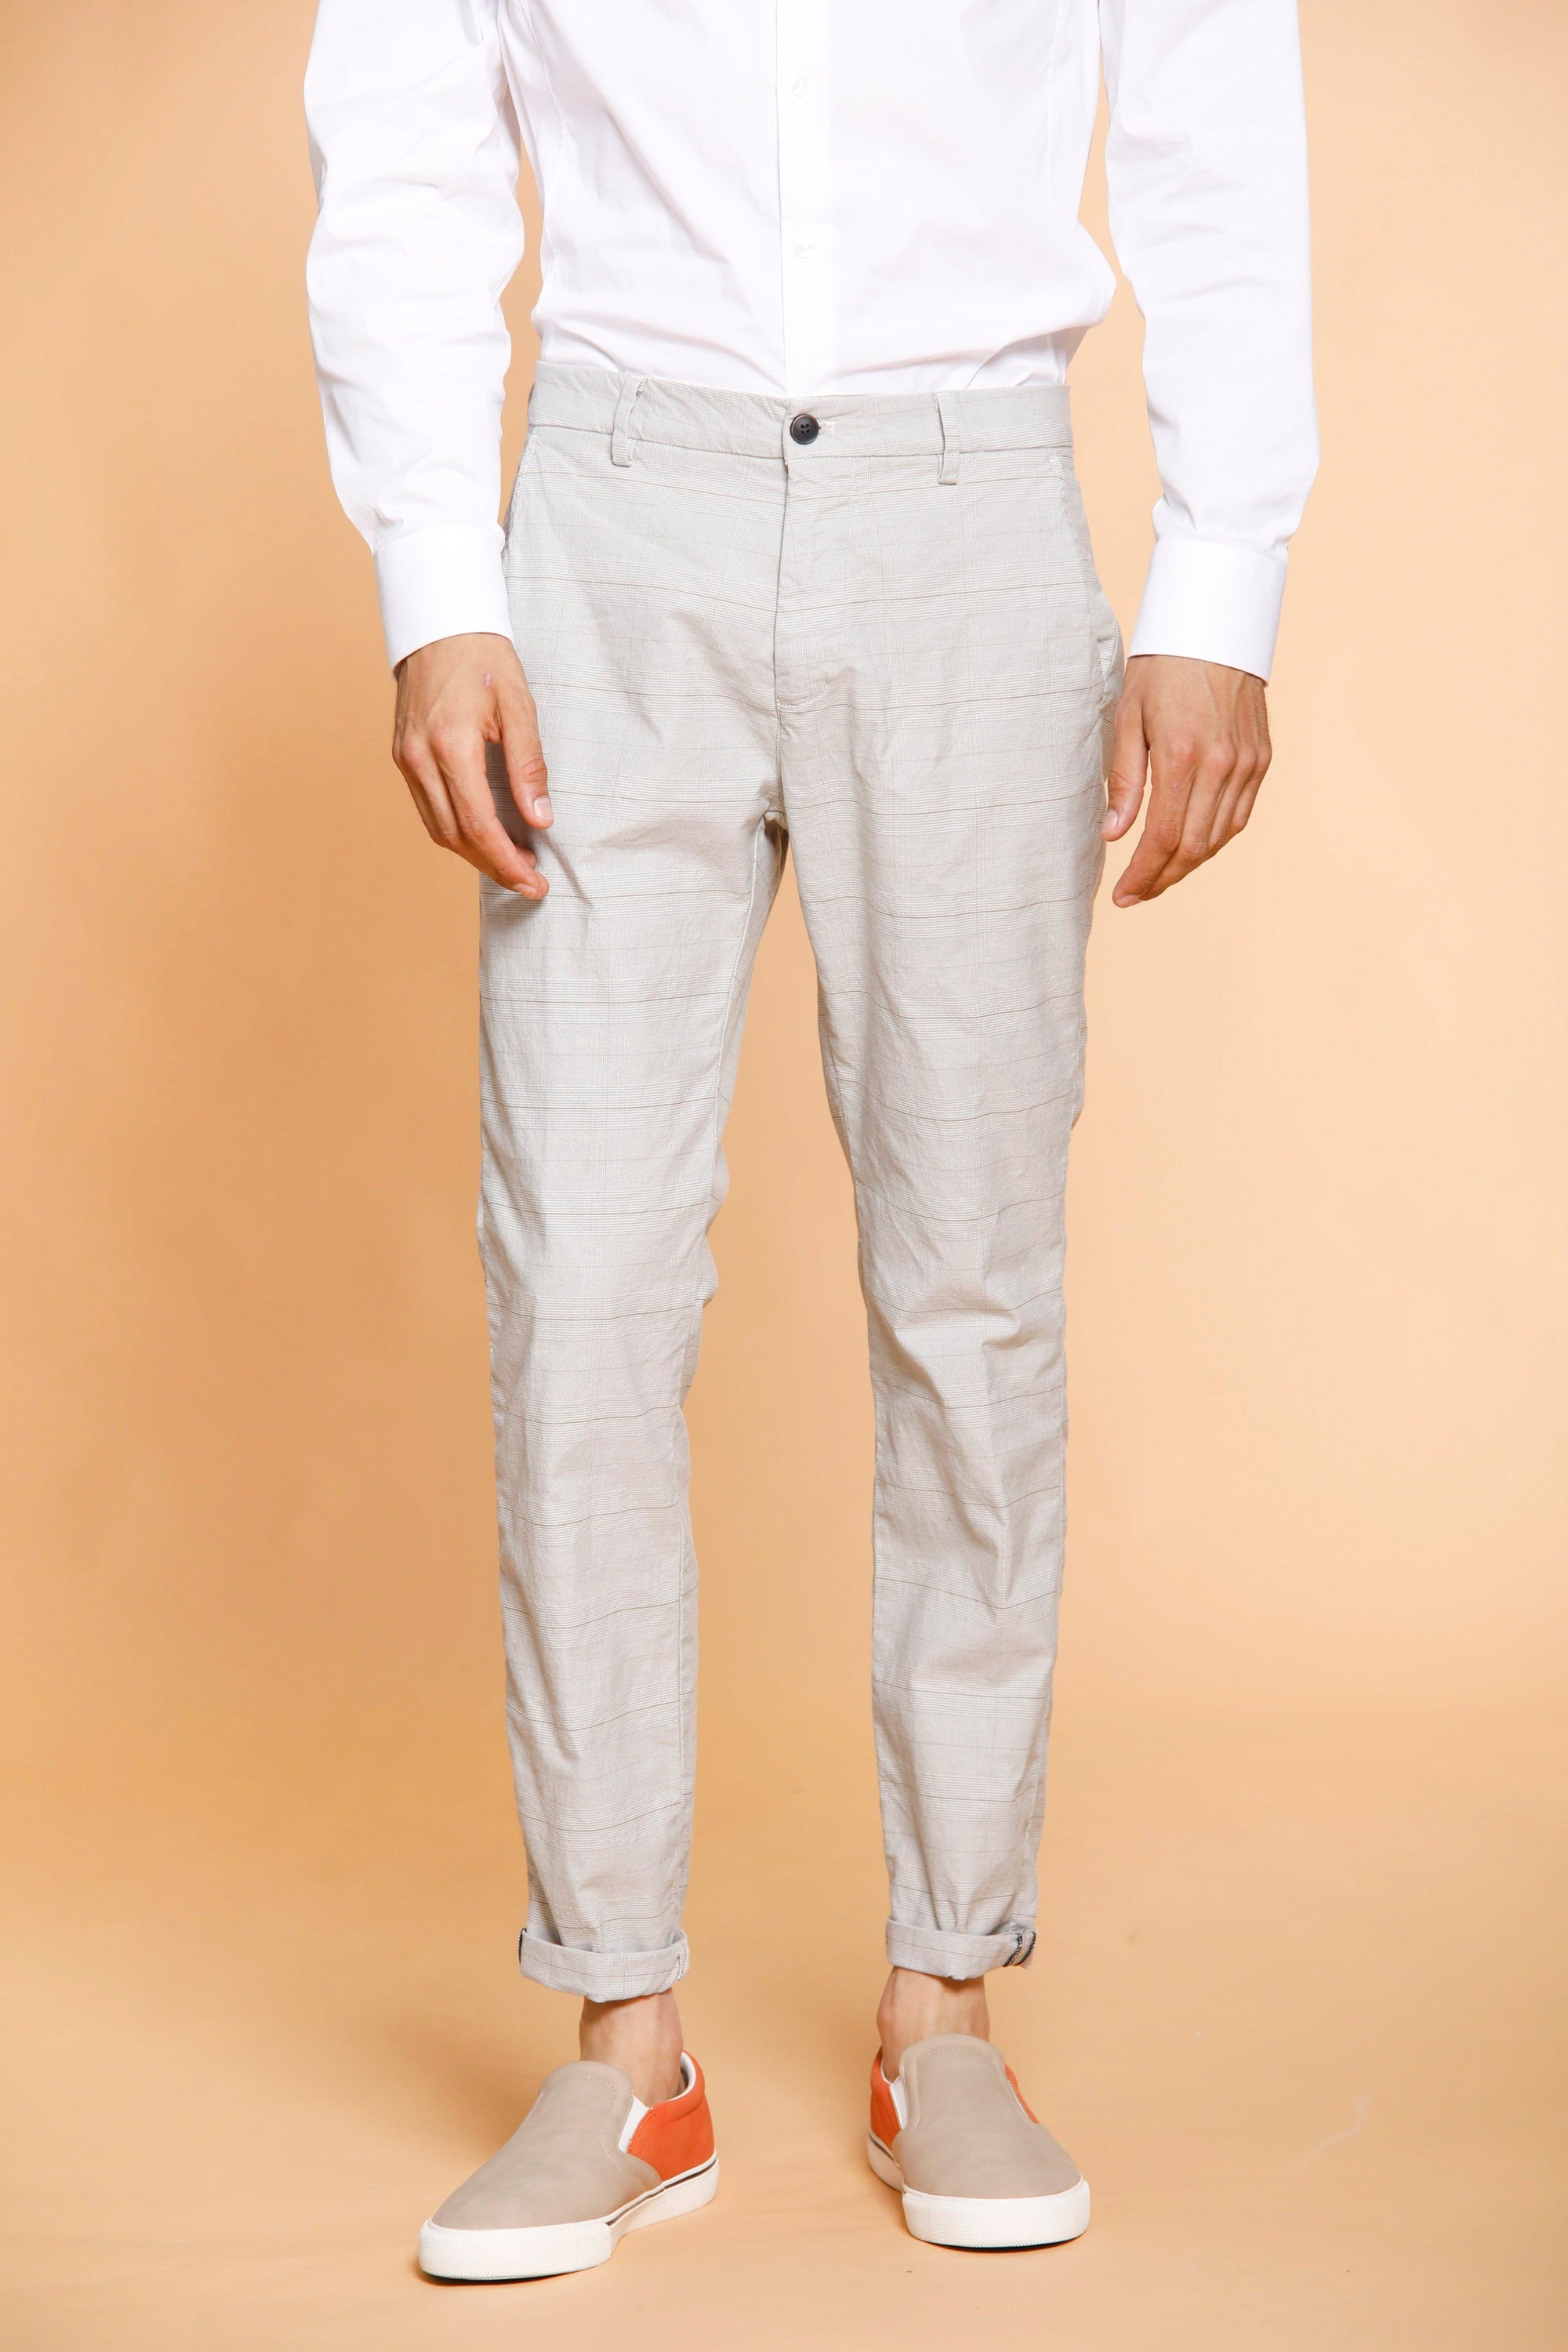 Osaka Style man chino pants in tencel with wales pattern carrot fit